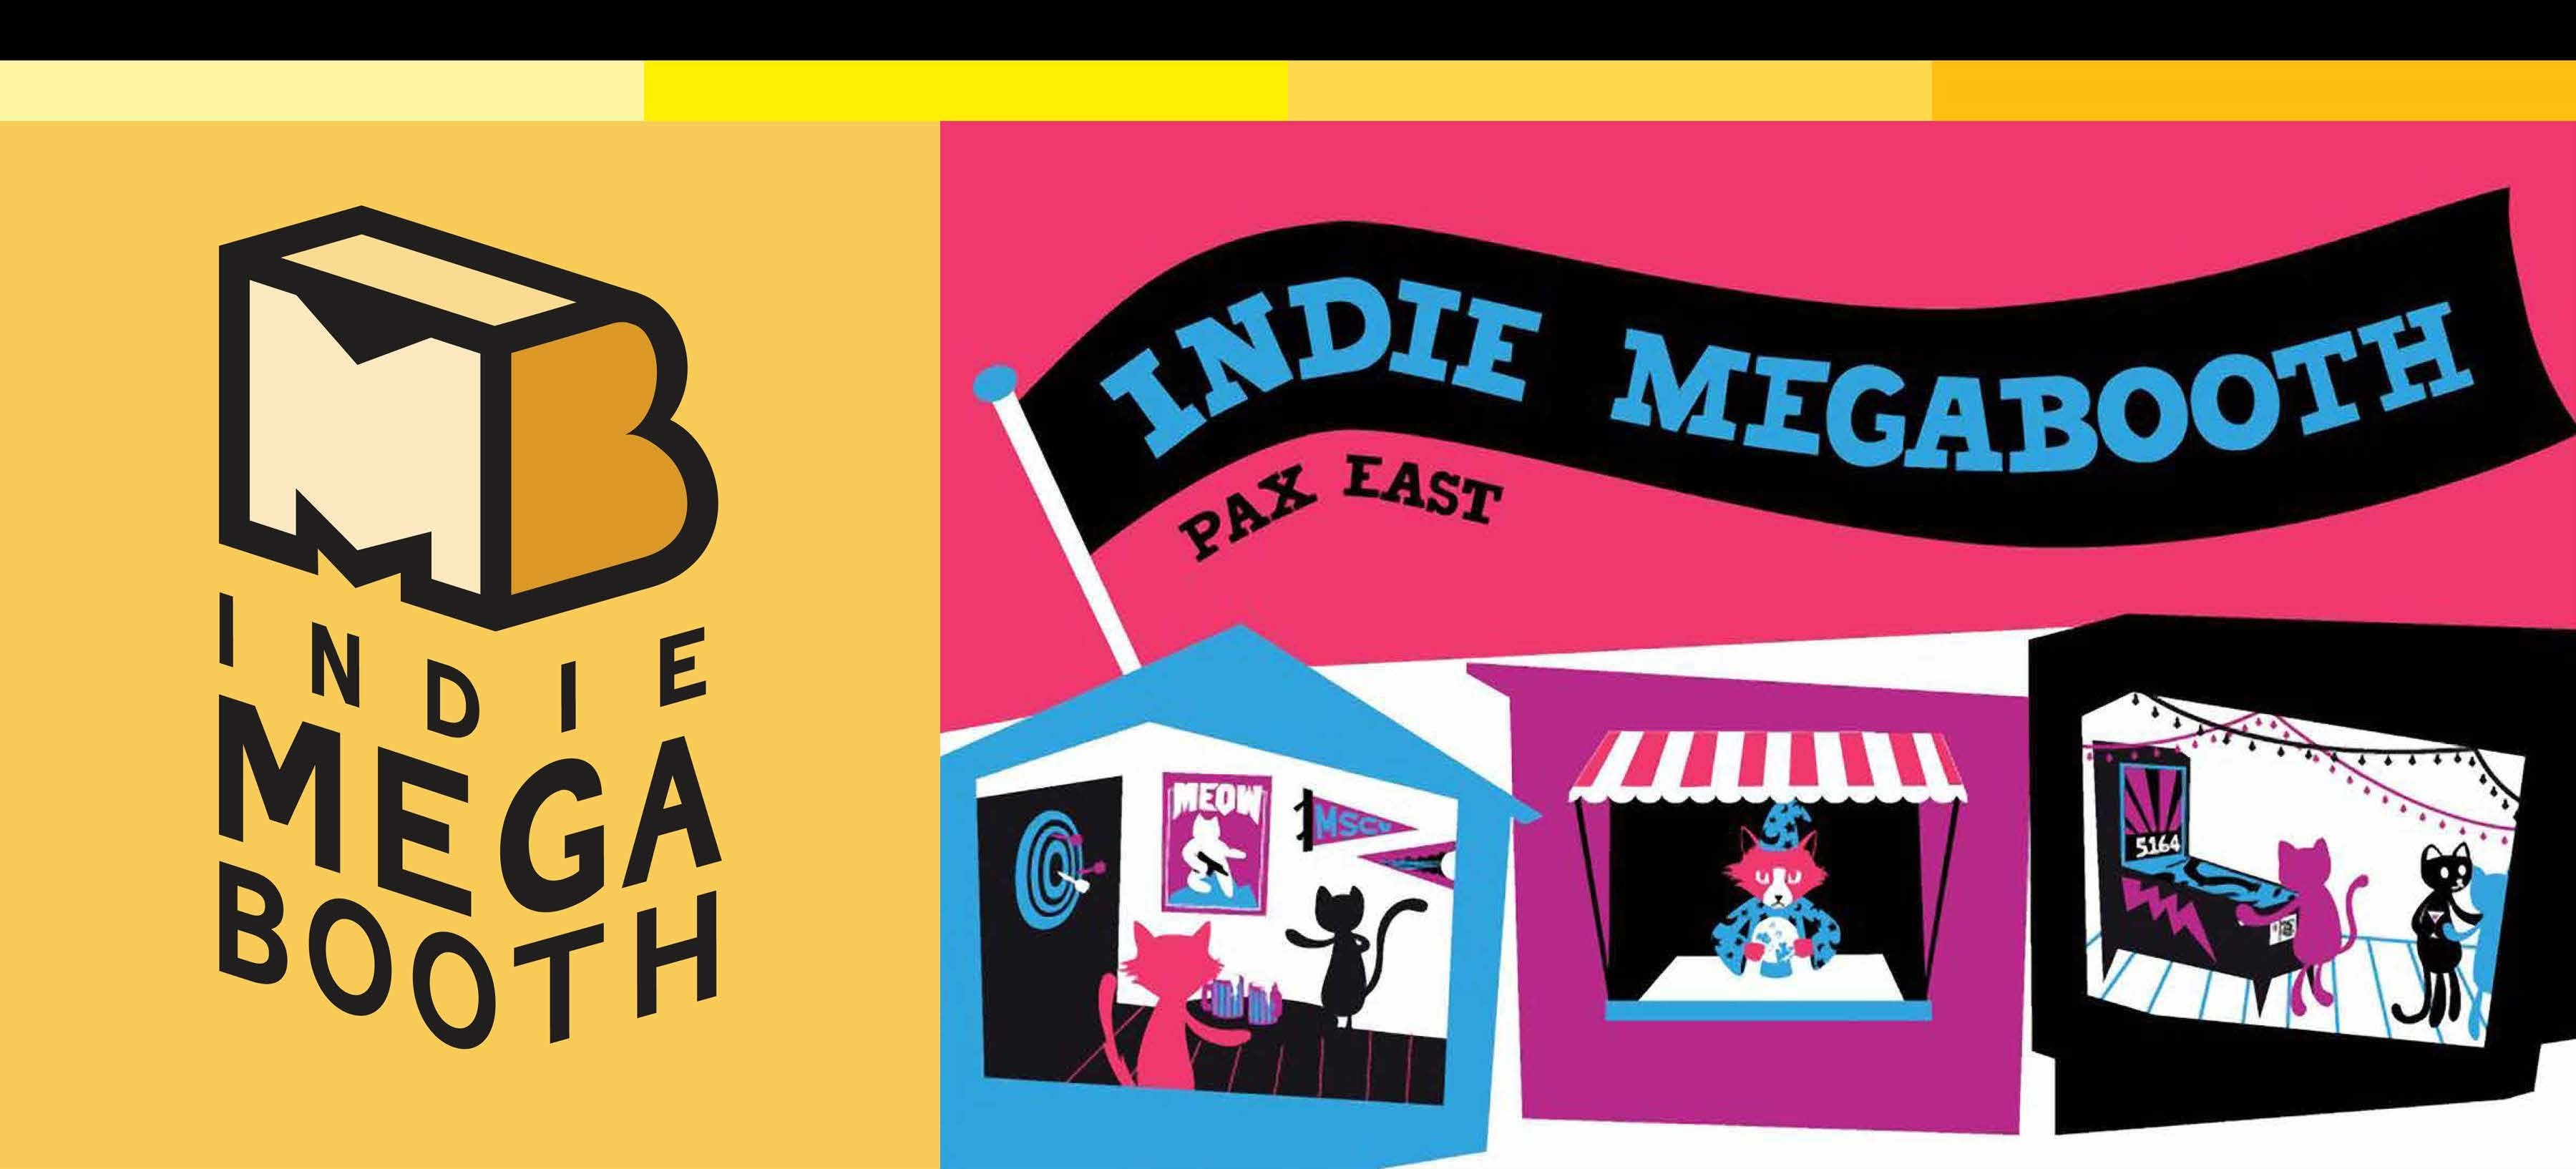 Indie Megabooth poster image of logo and carnival graphics with cats